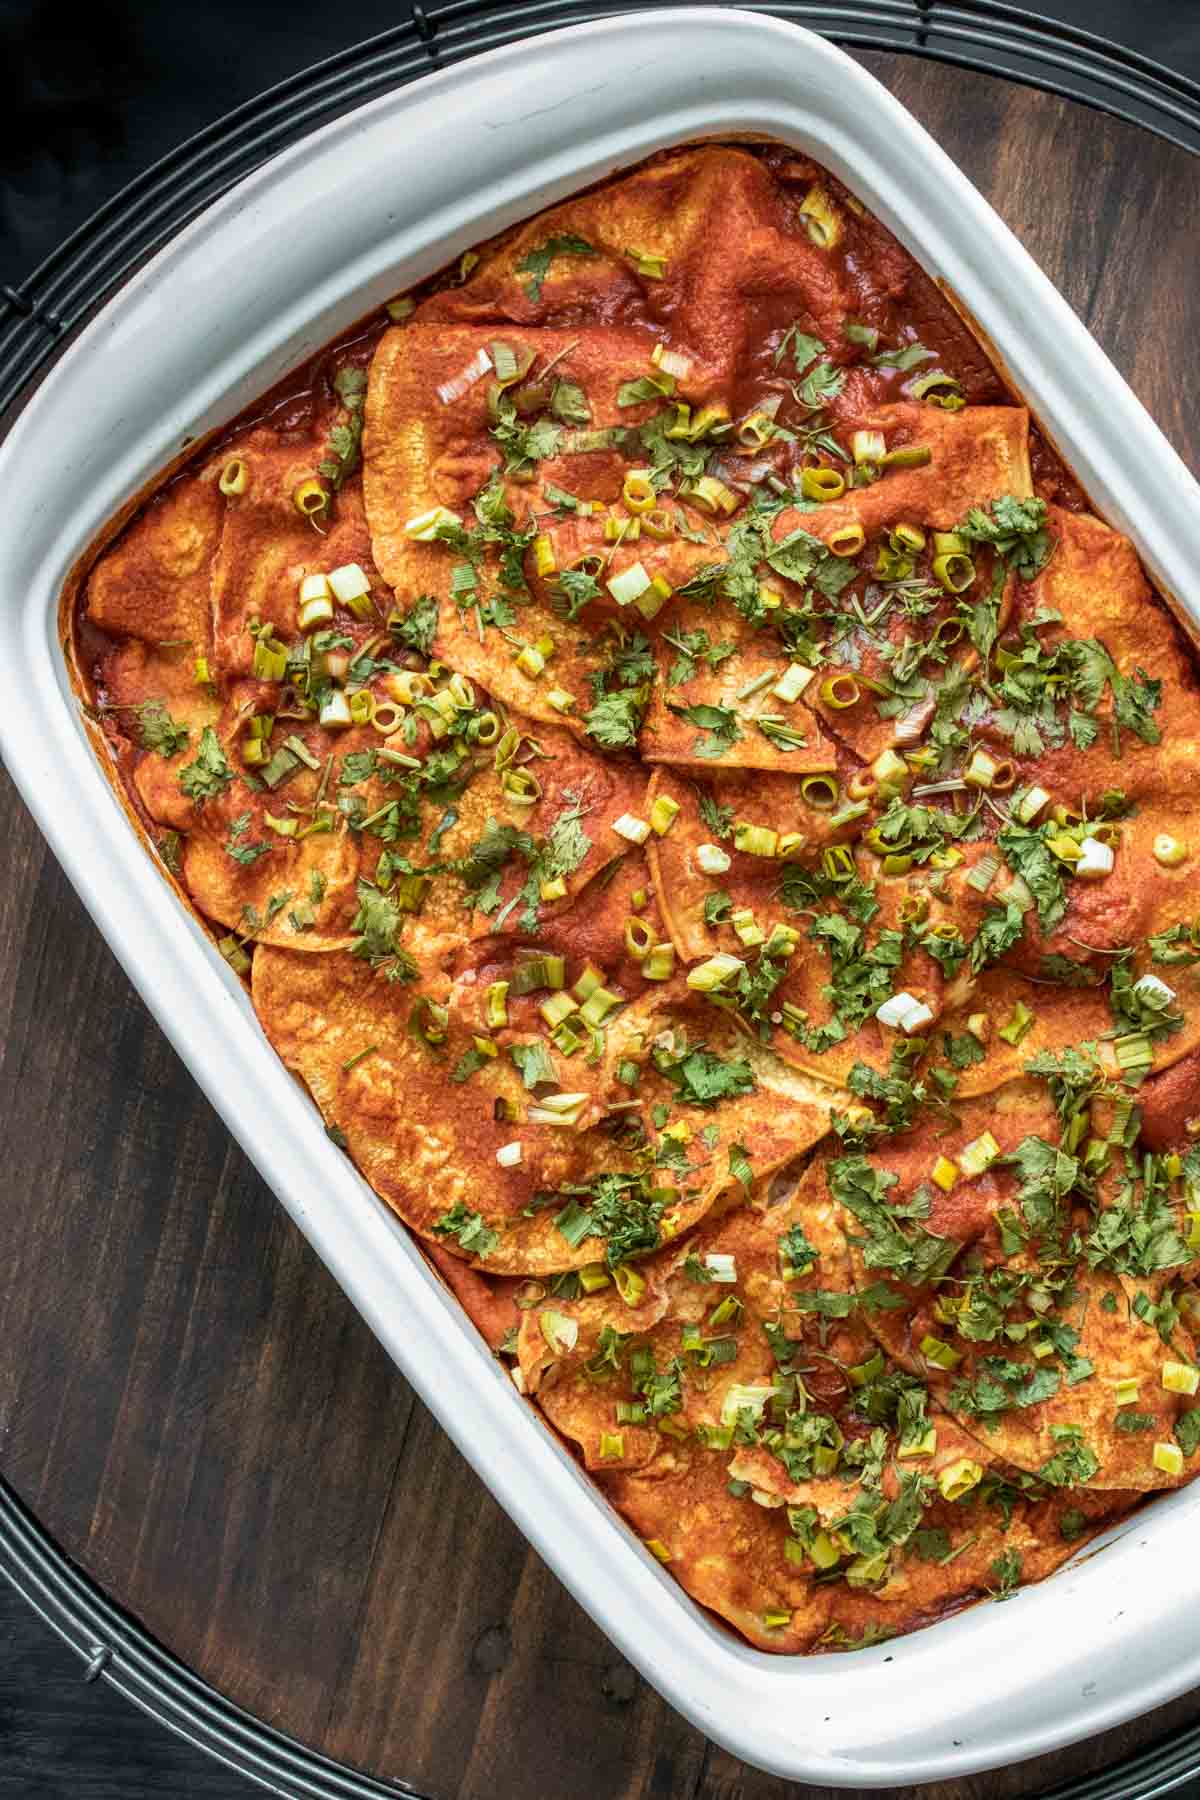 Top view of a baked layered enchilada casserole with red sauce and green onions.